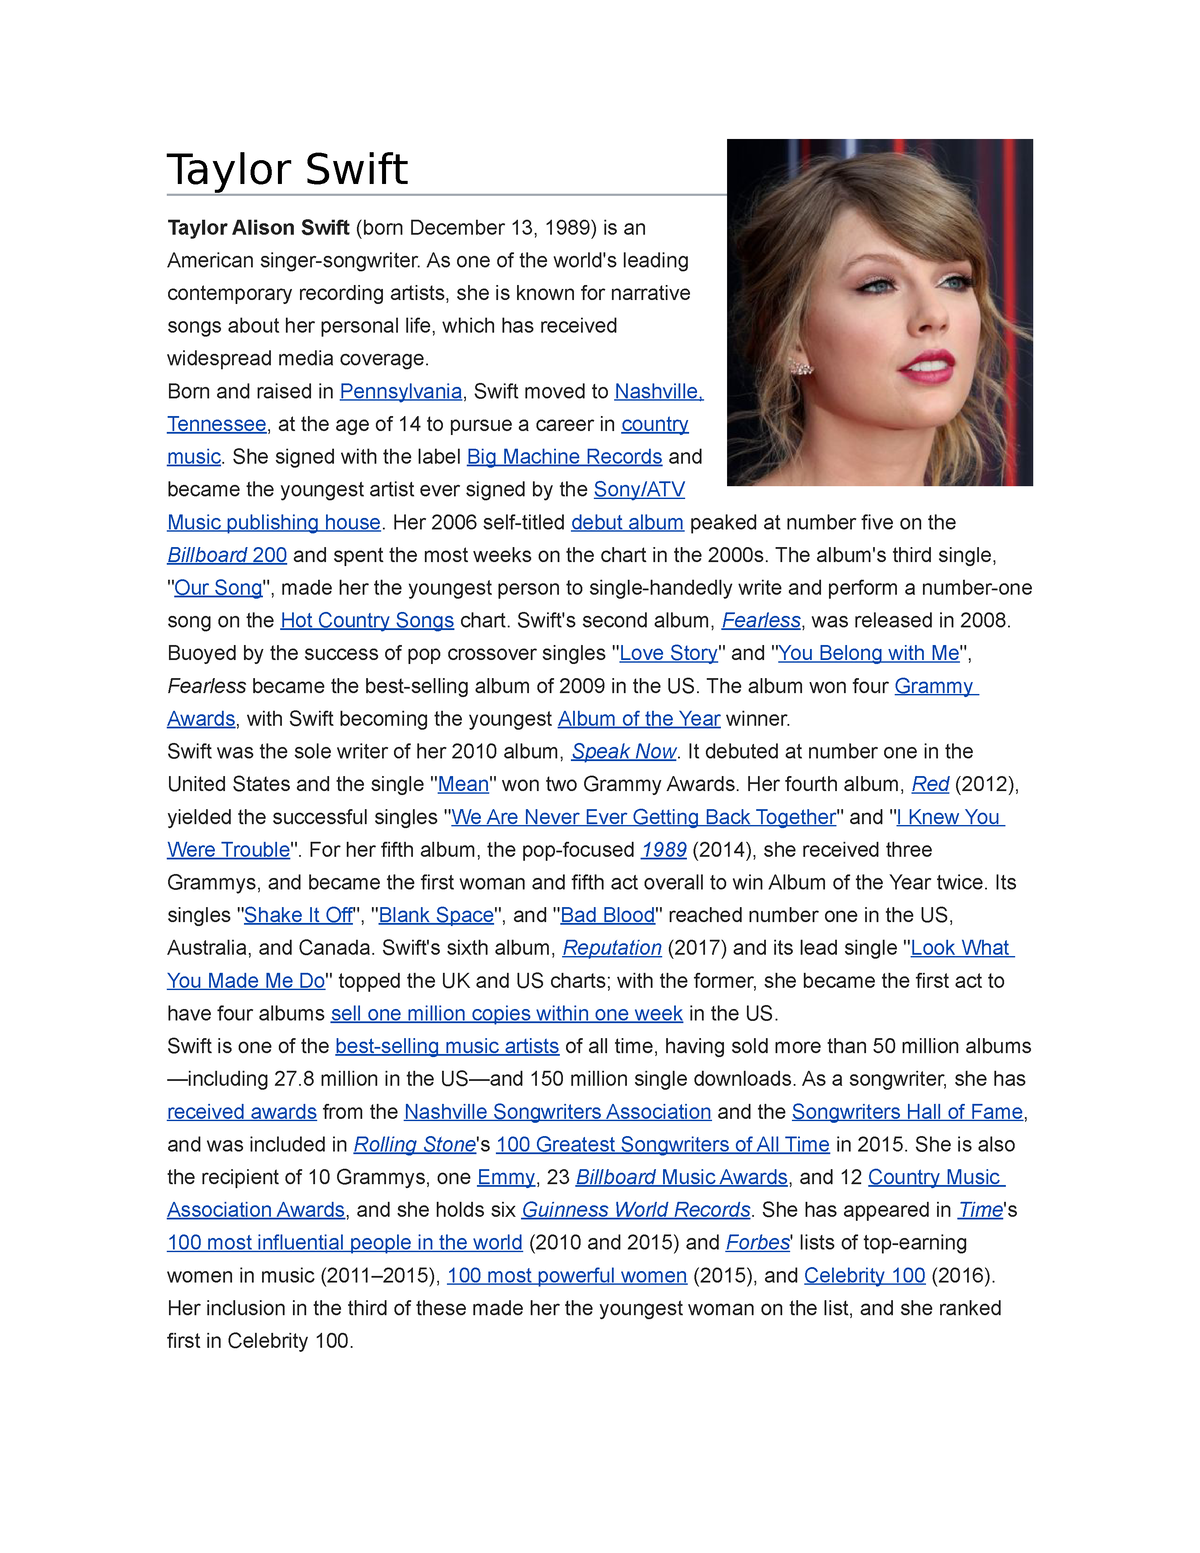 biography taylor swift in english